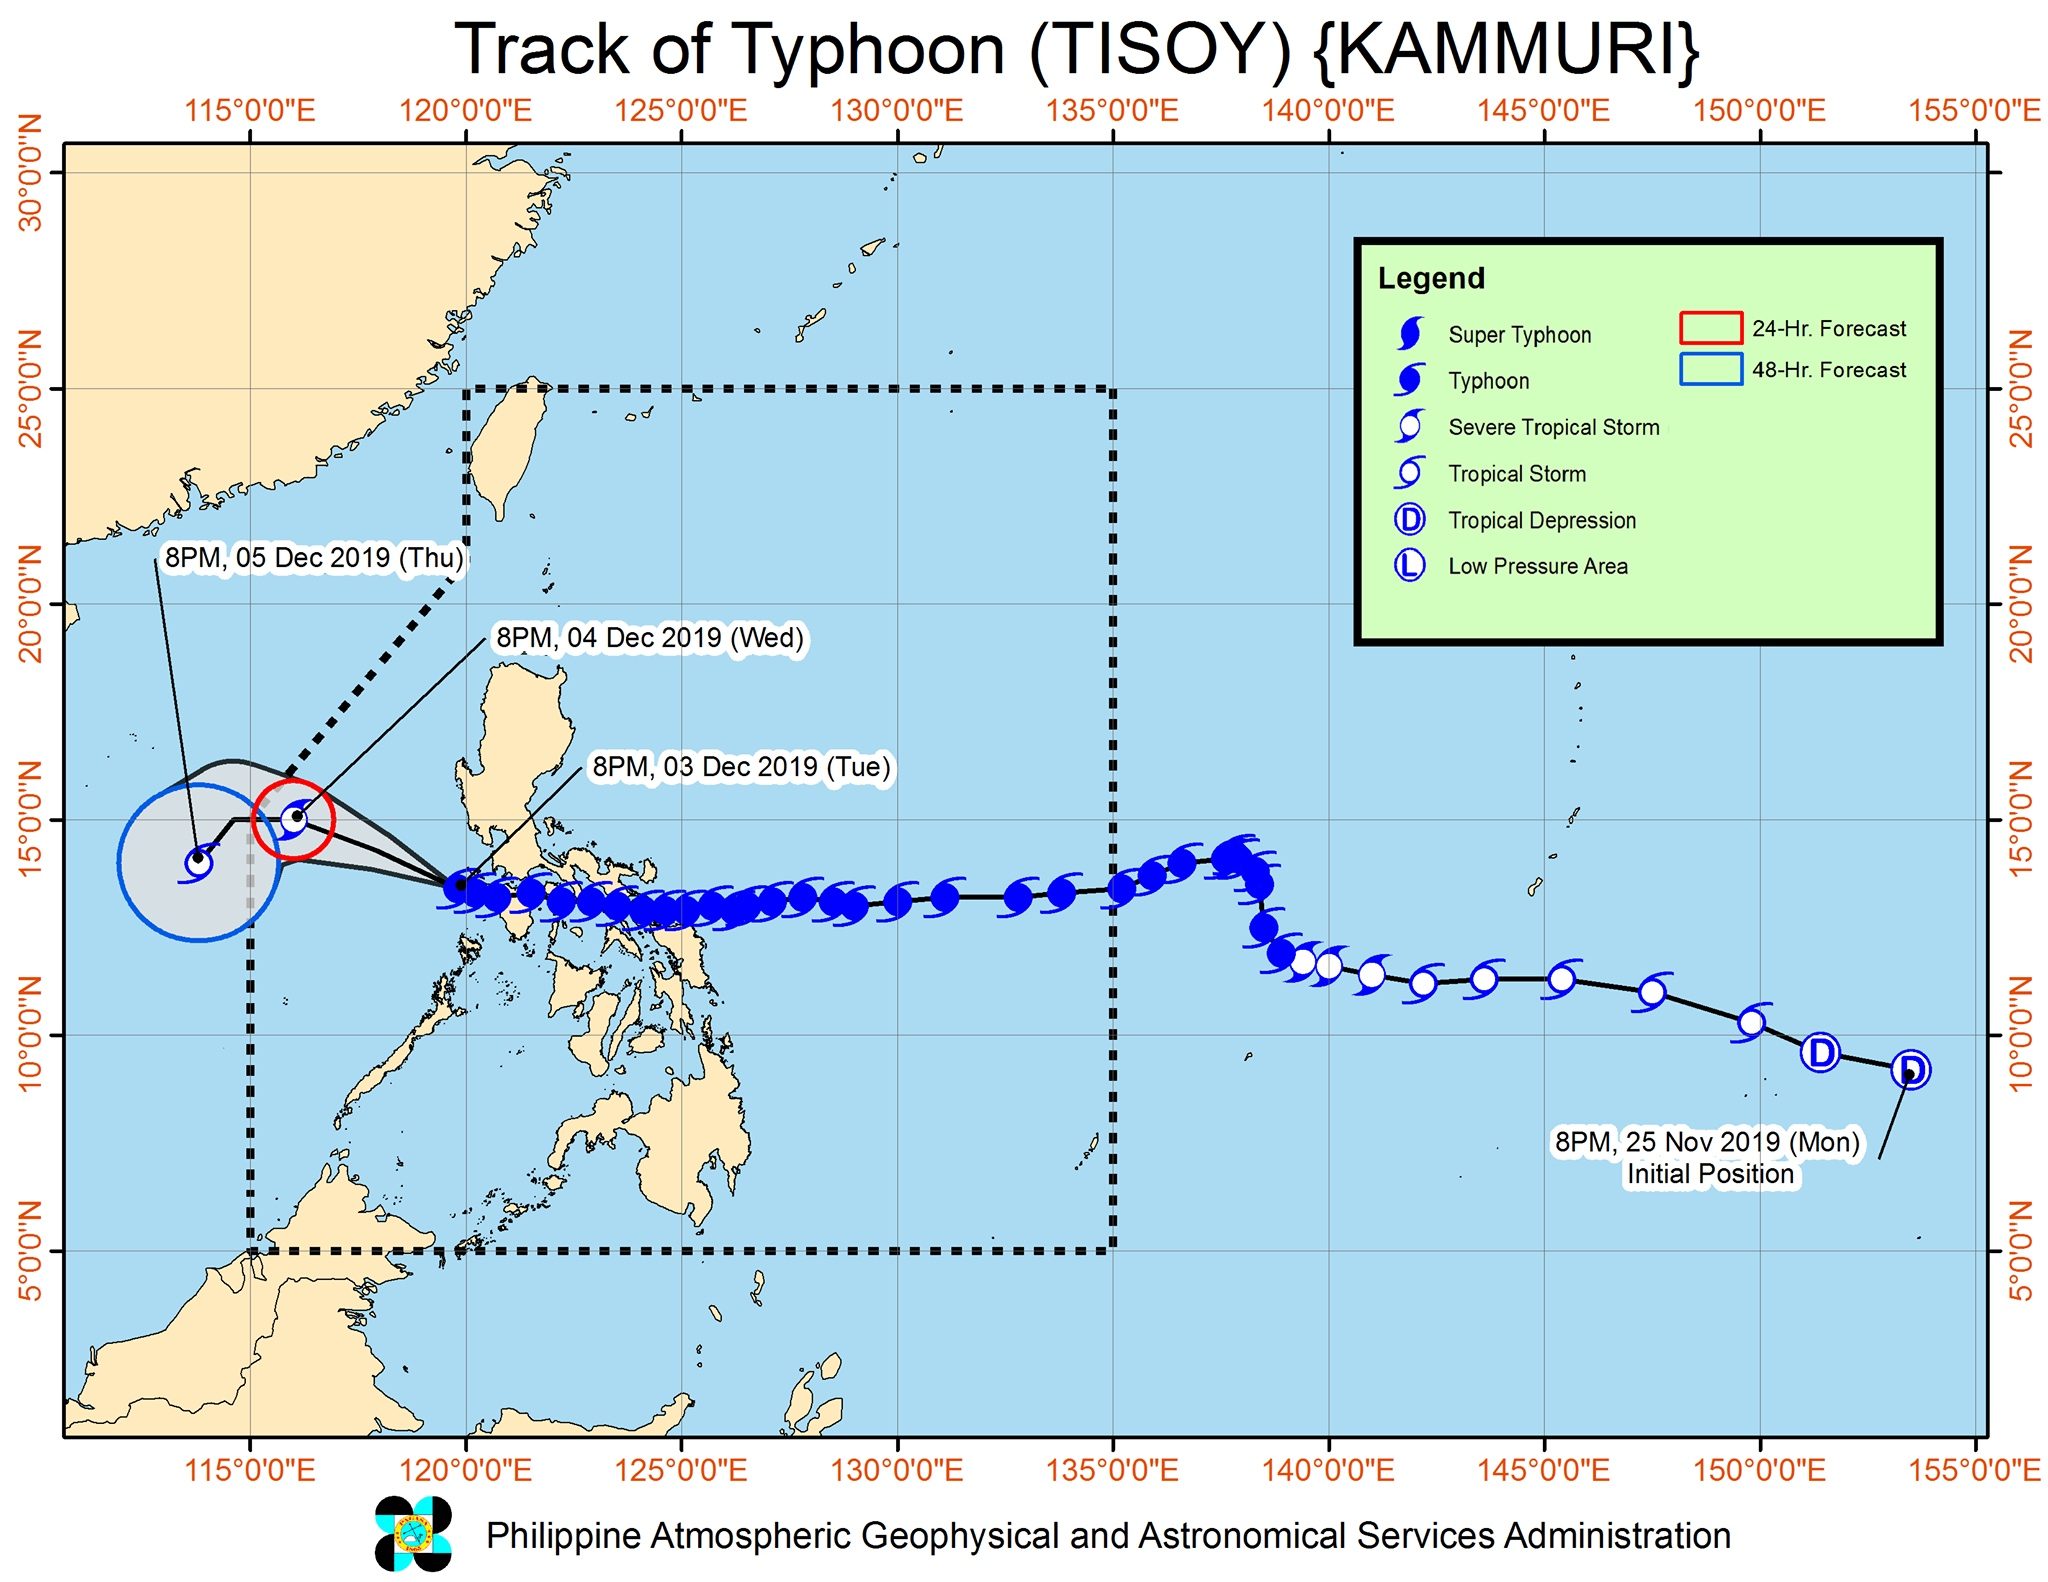 Forecast track of Typhoon Tisoy (Kammuri) as of December 3, 2019, 11 pm. Image from PAGASA 